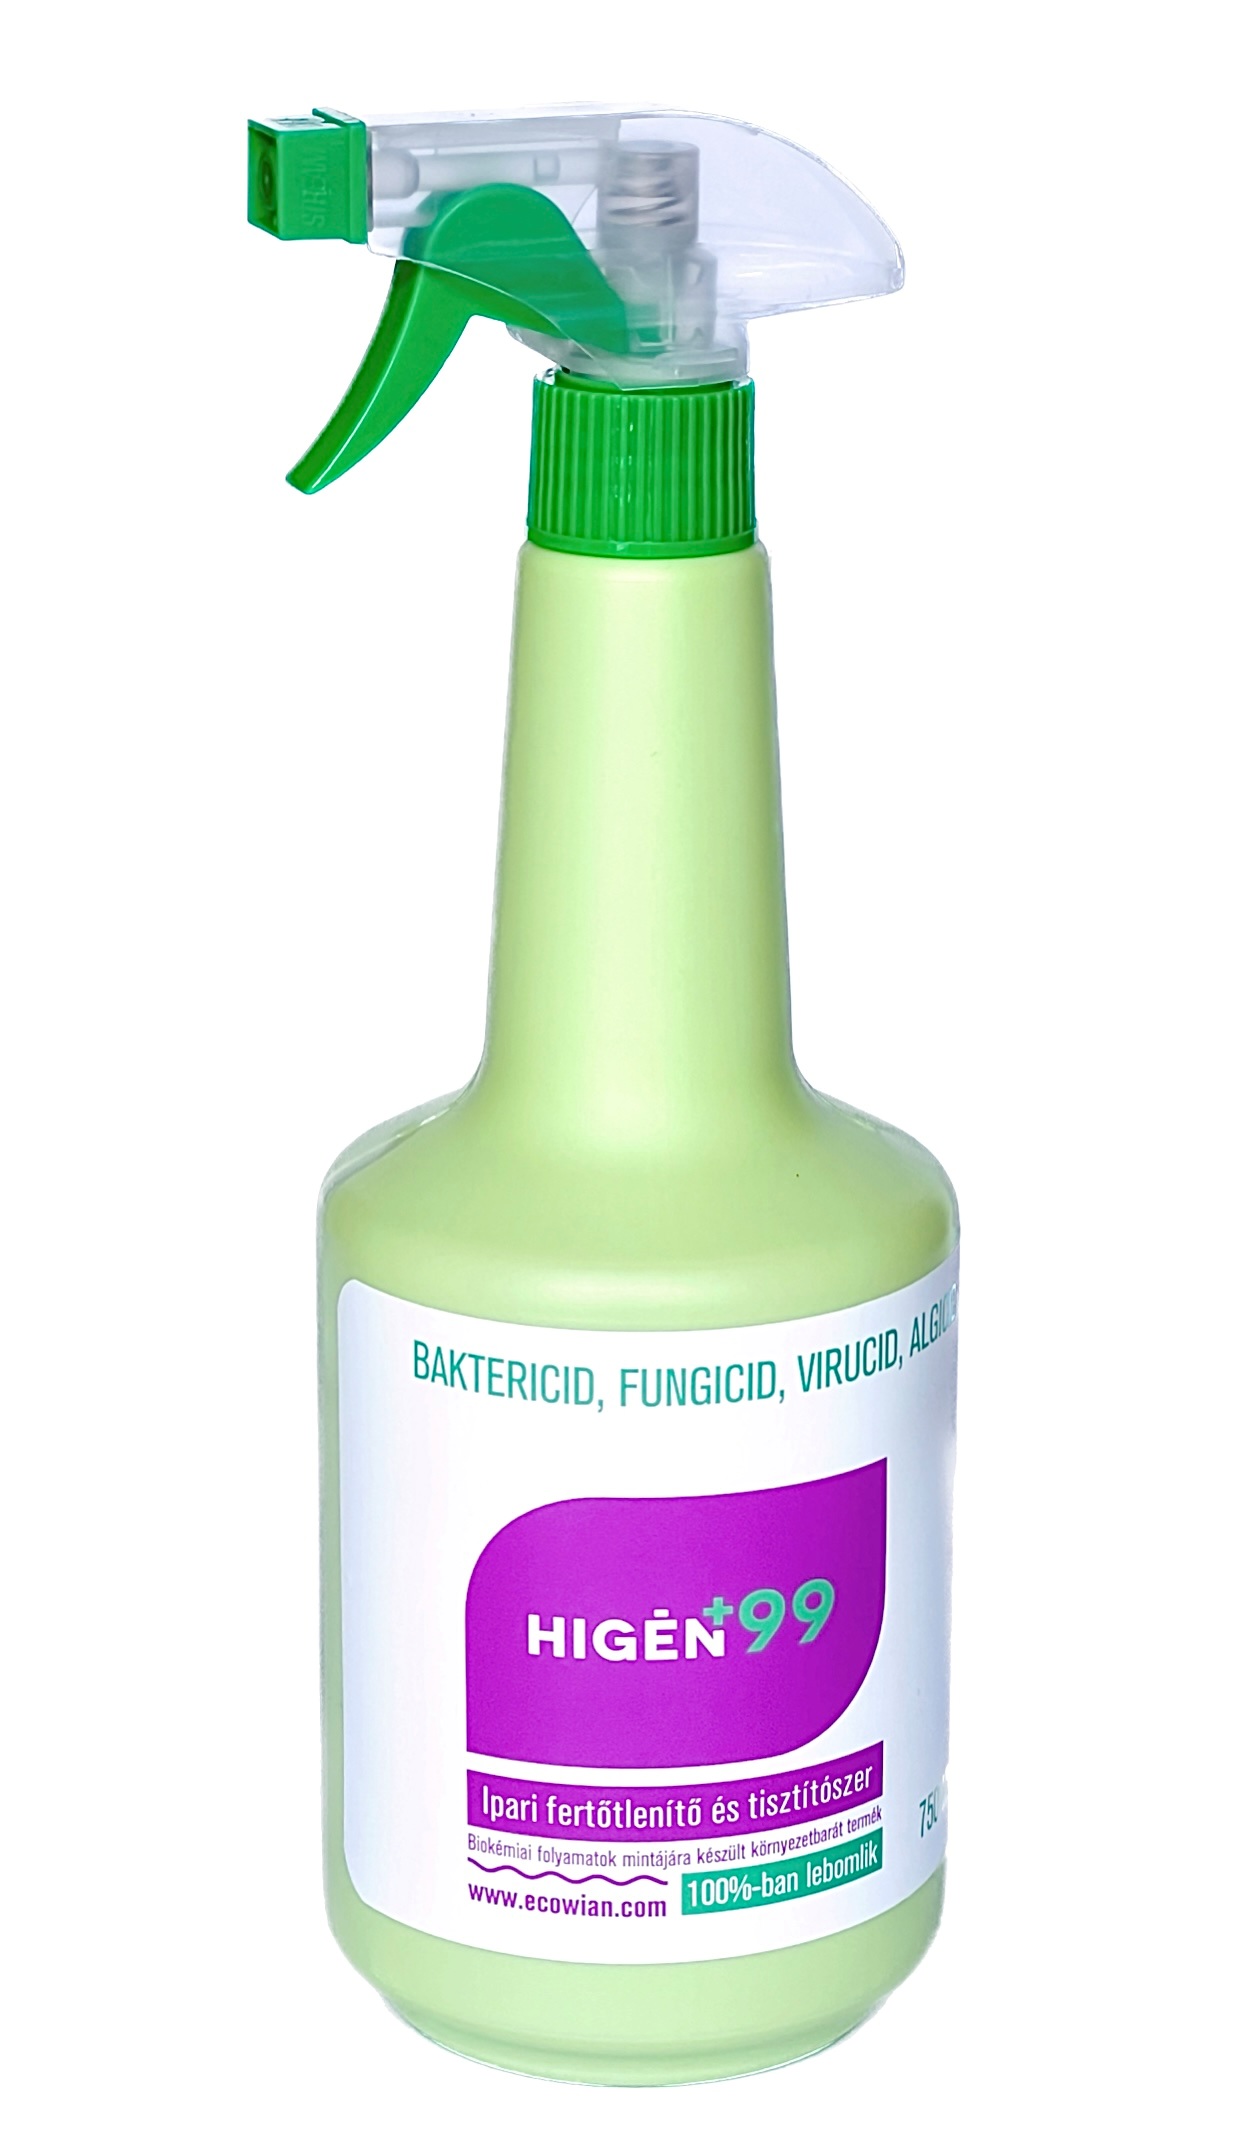 Higén99 disinfectant and cleaner 0,75l